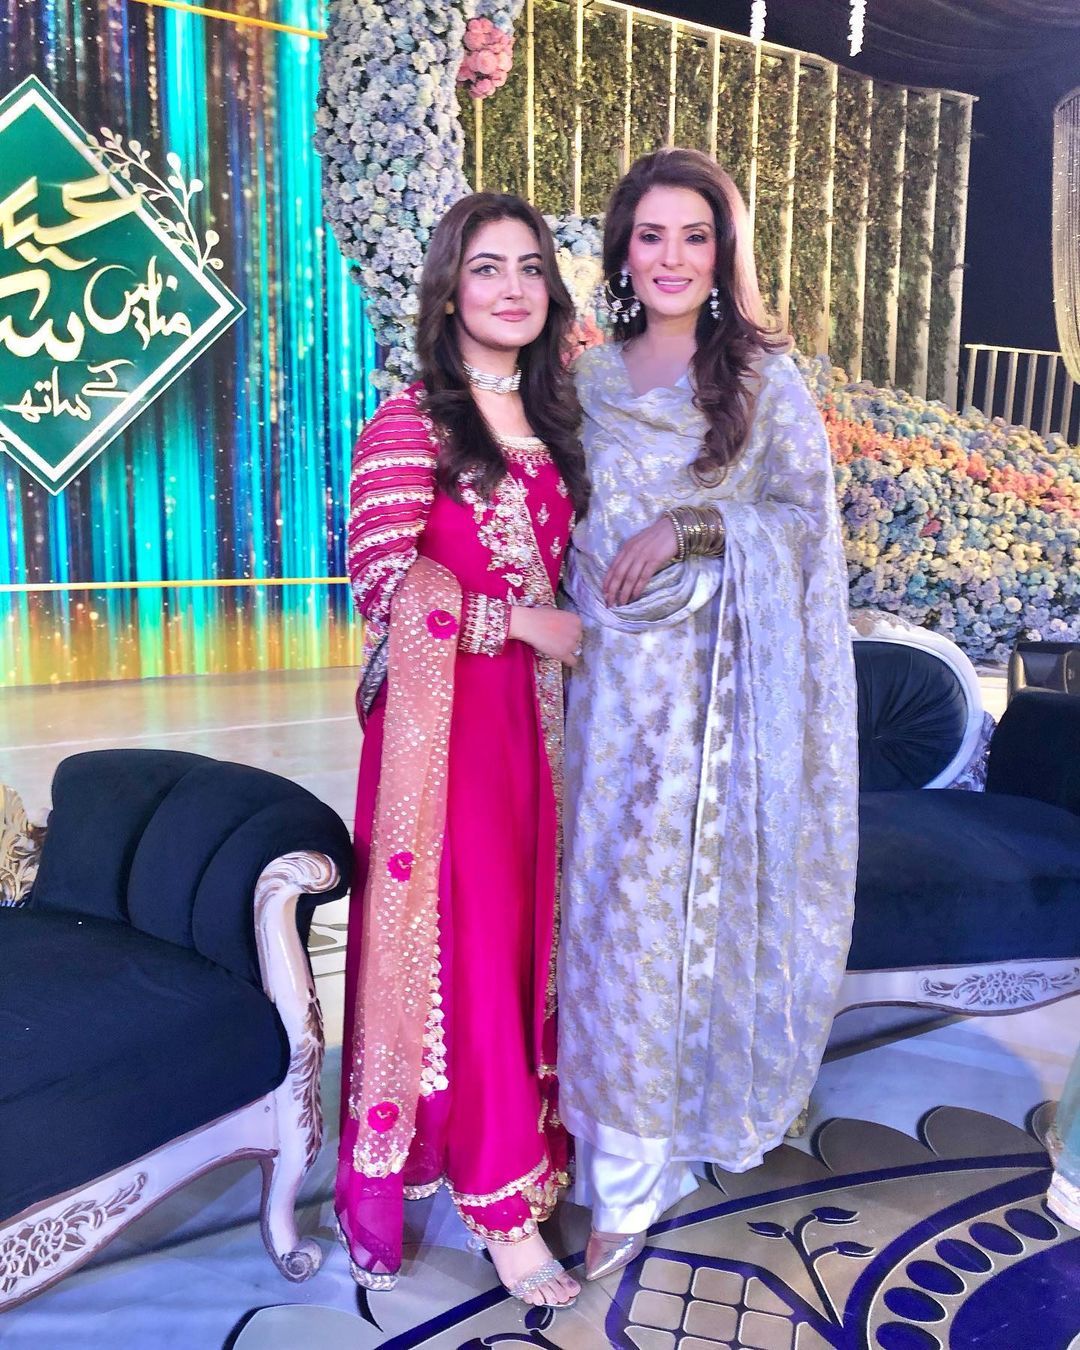 Beautiful Pictures of Celebrities from Eid Show 2021 Recording